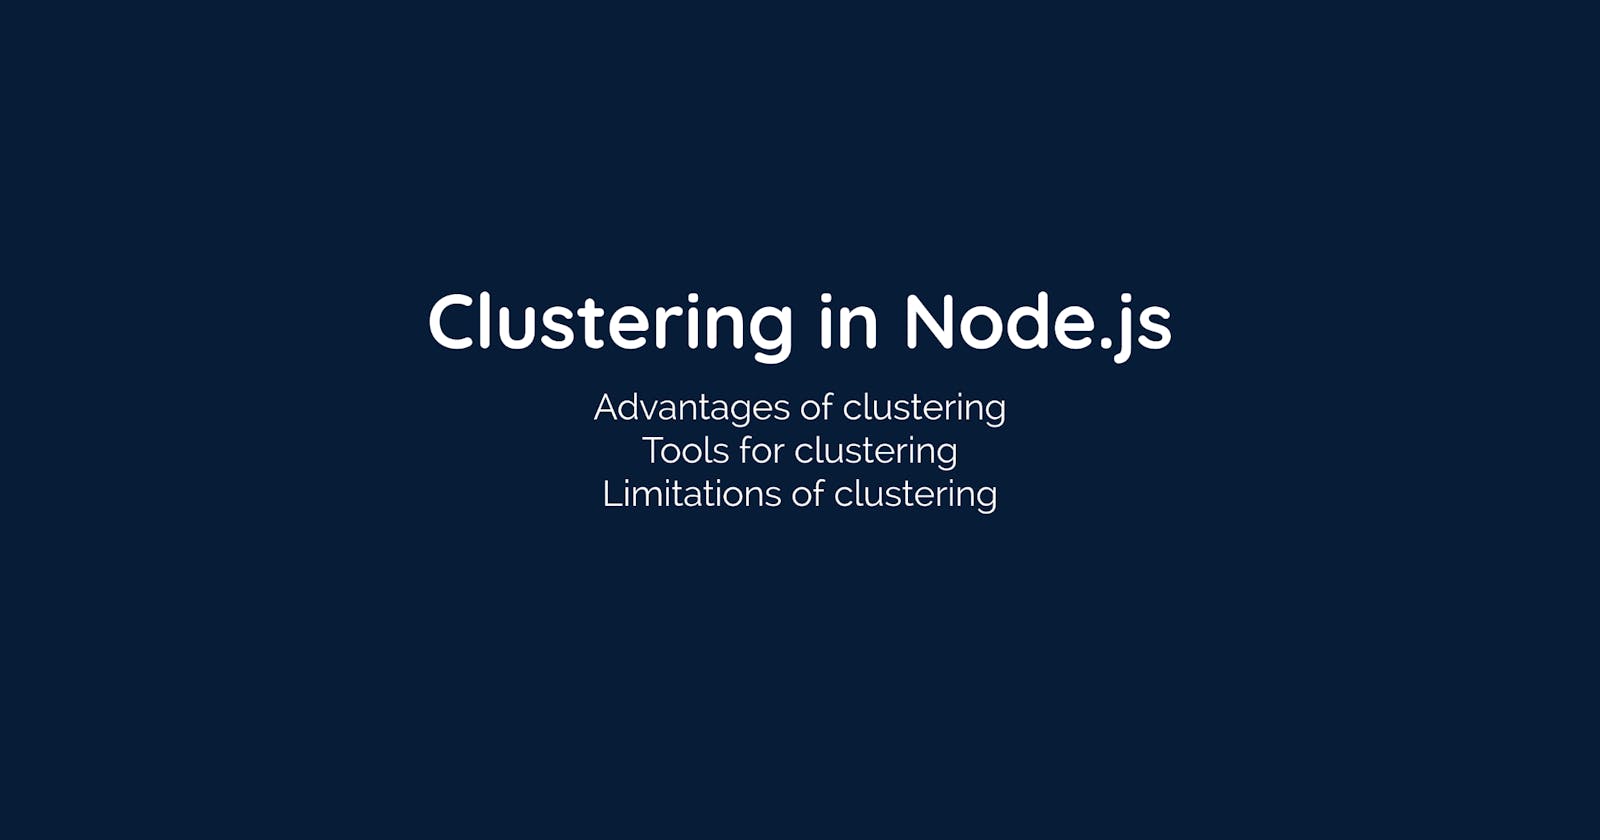 Clustering in Node.js: Look for the limitations